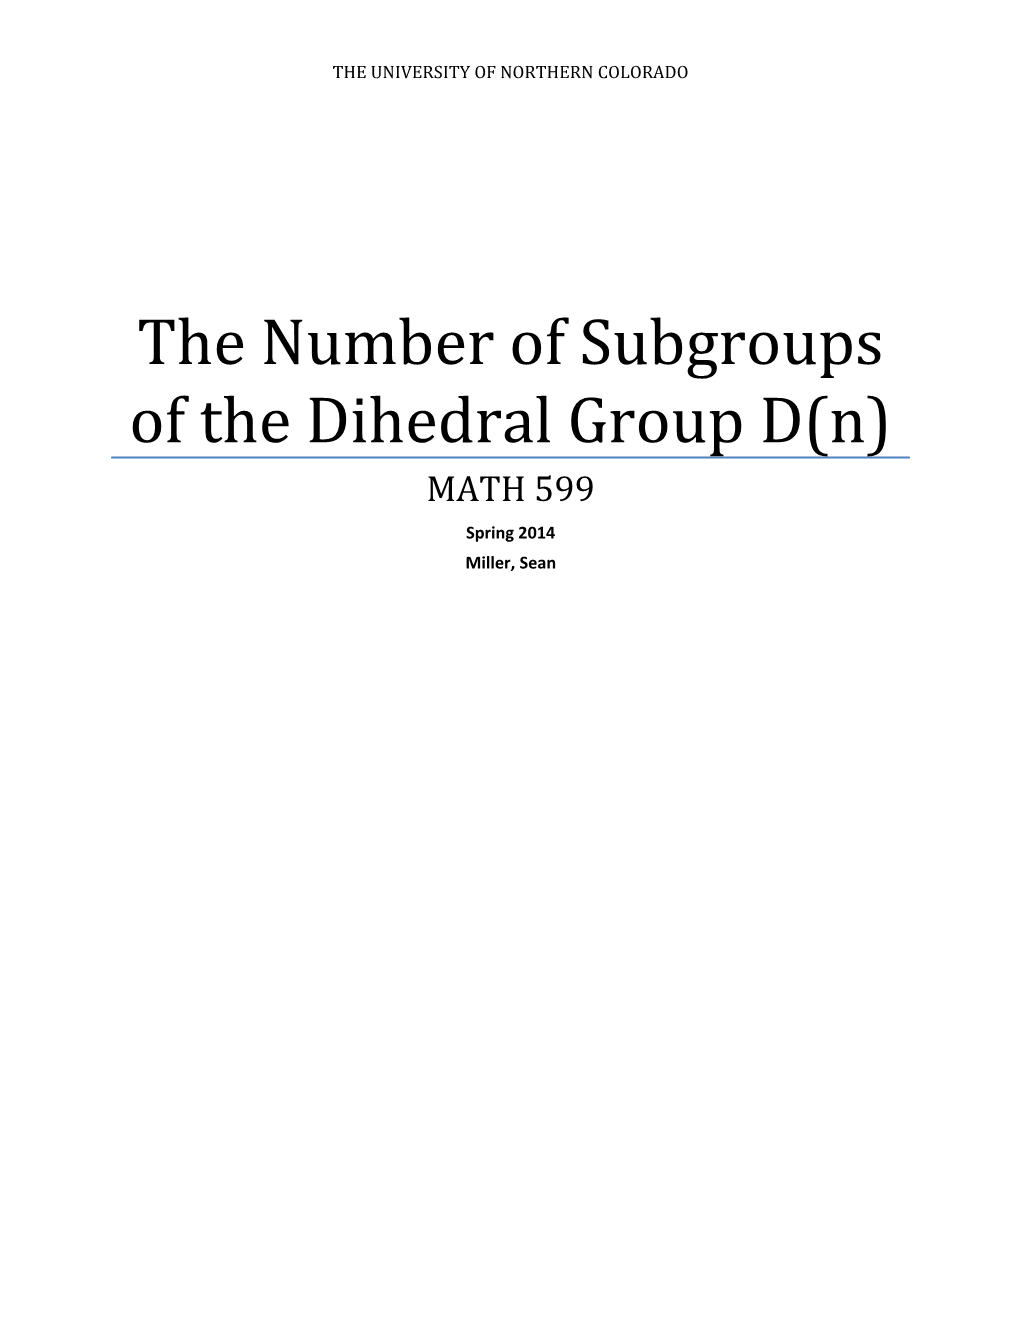 The Number of Subgroups of the Dihedral Group D(N)